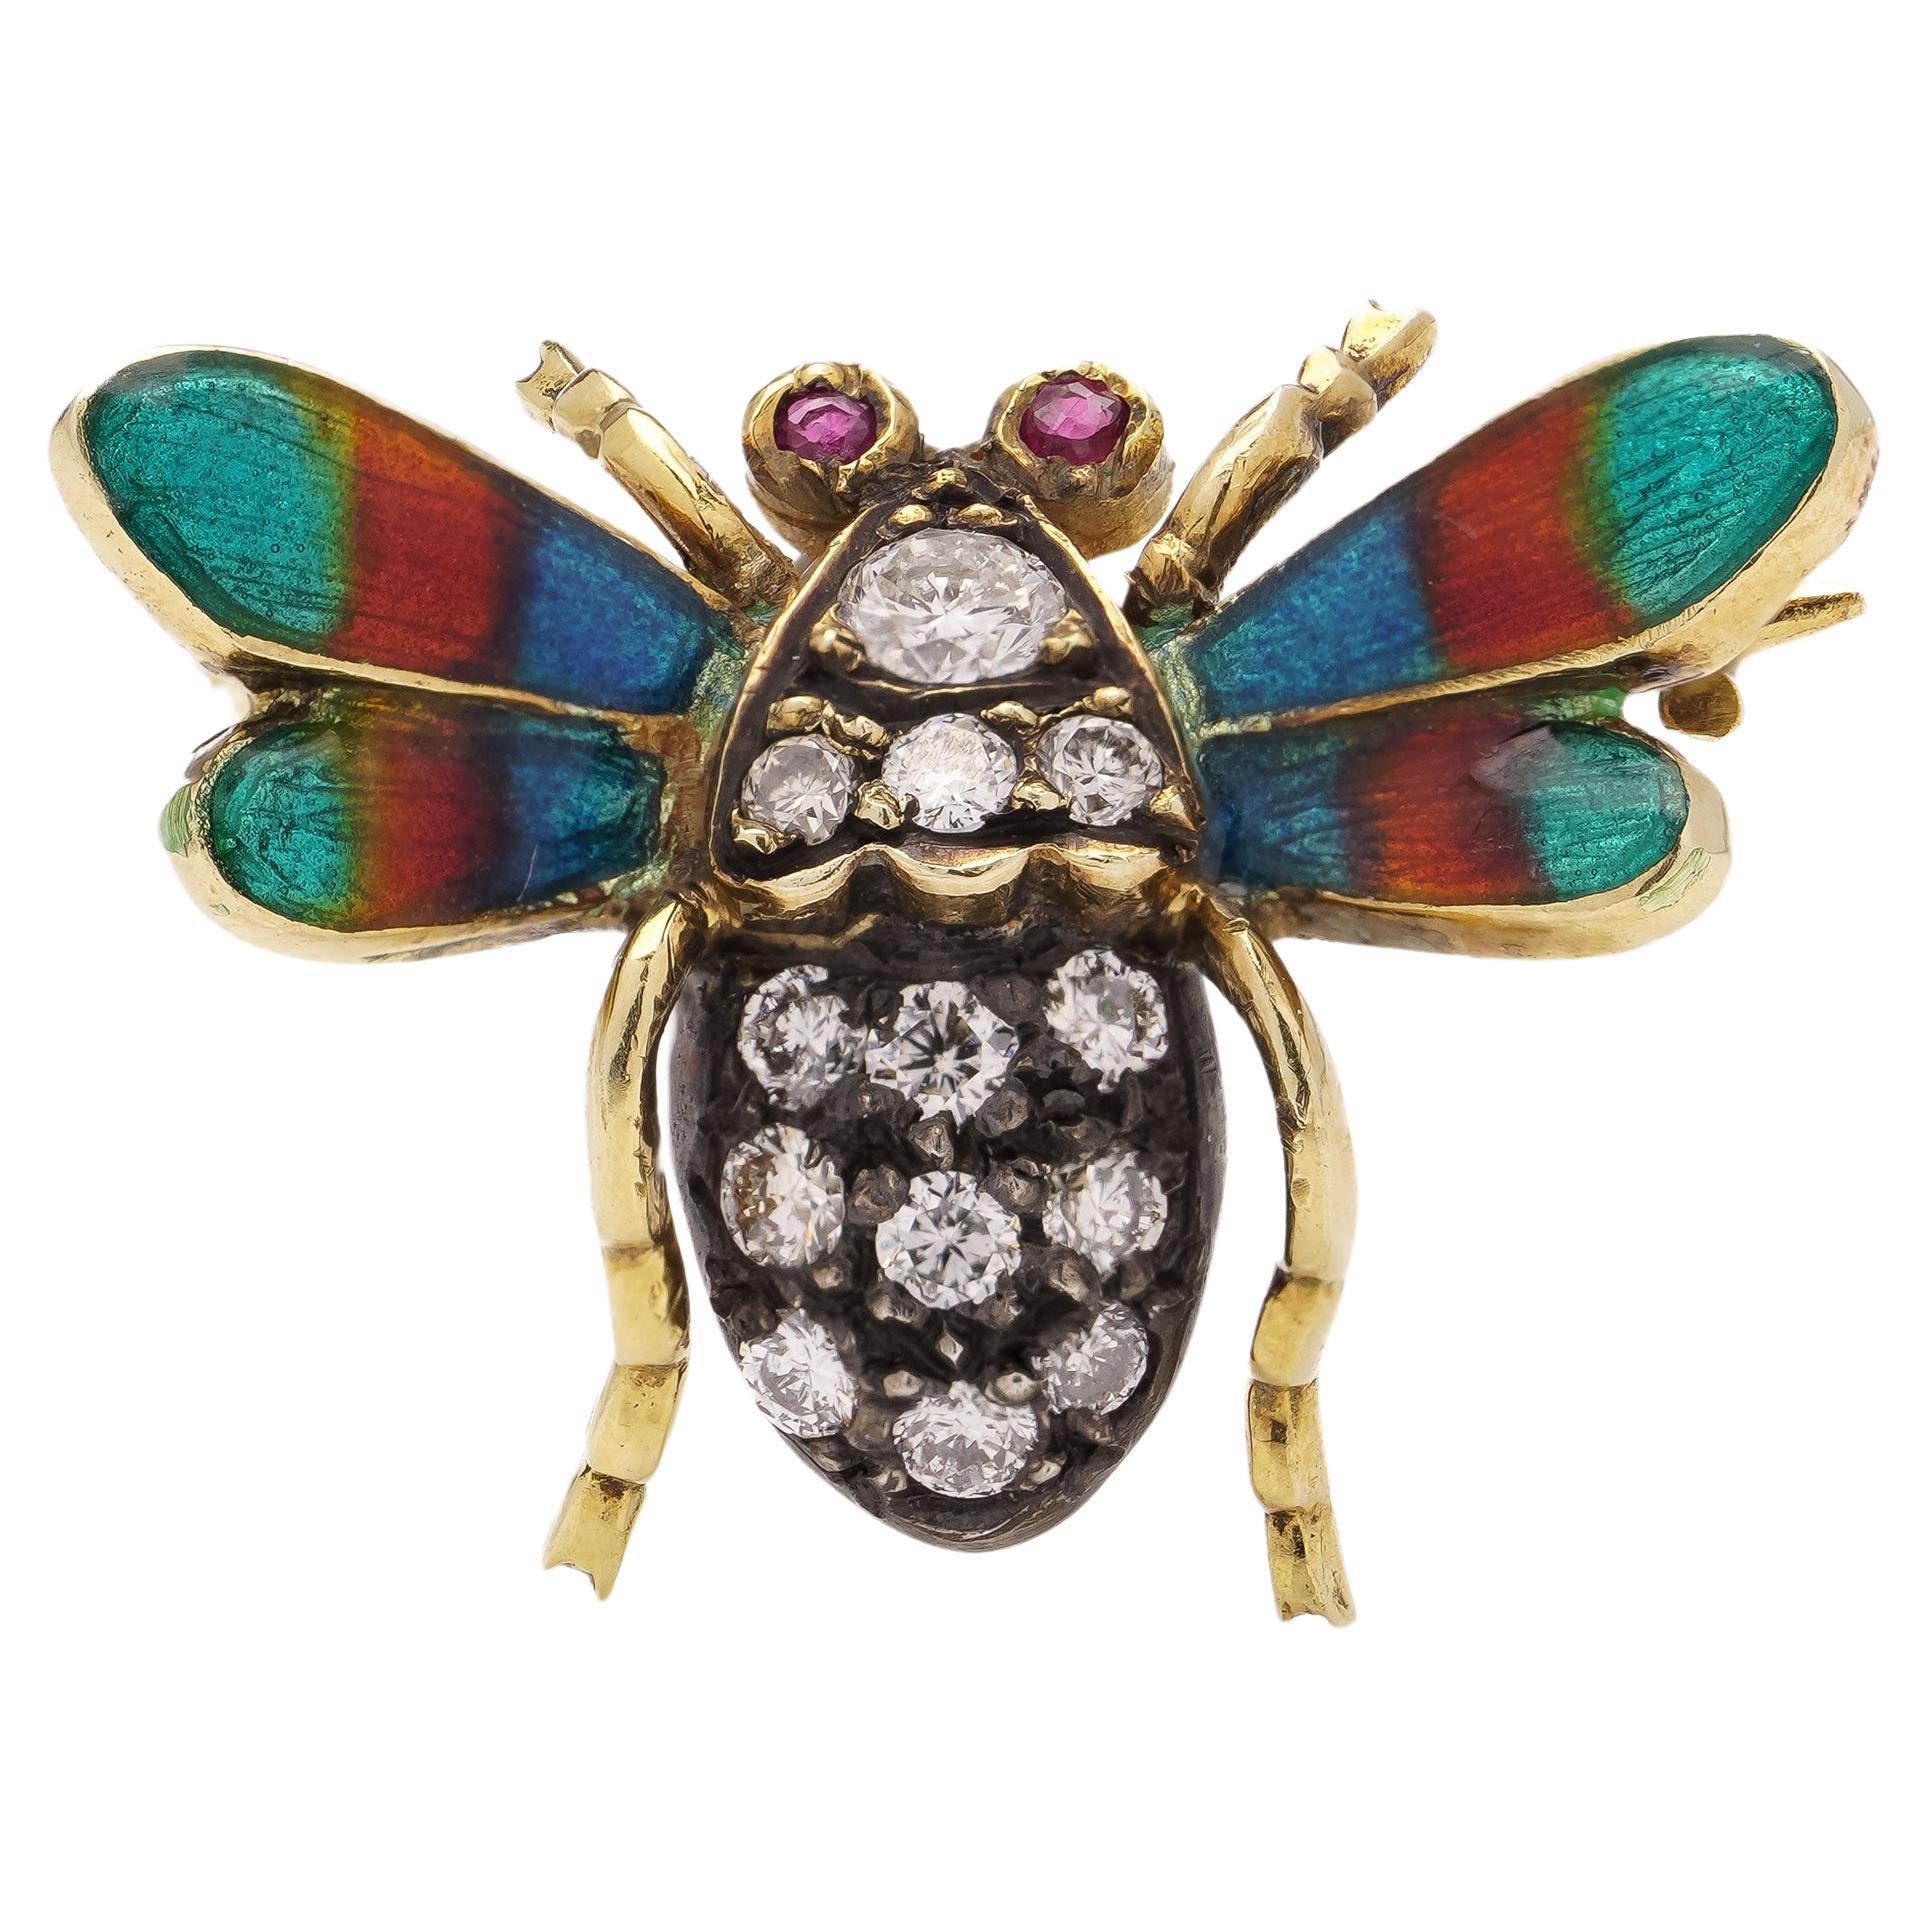  Edwardian 18kt. yellow gold and silver open-winged insect brooch For Sale